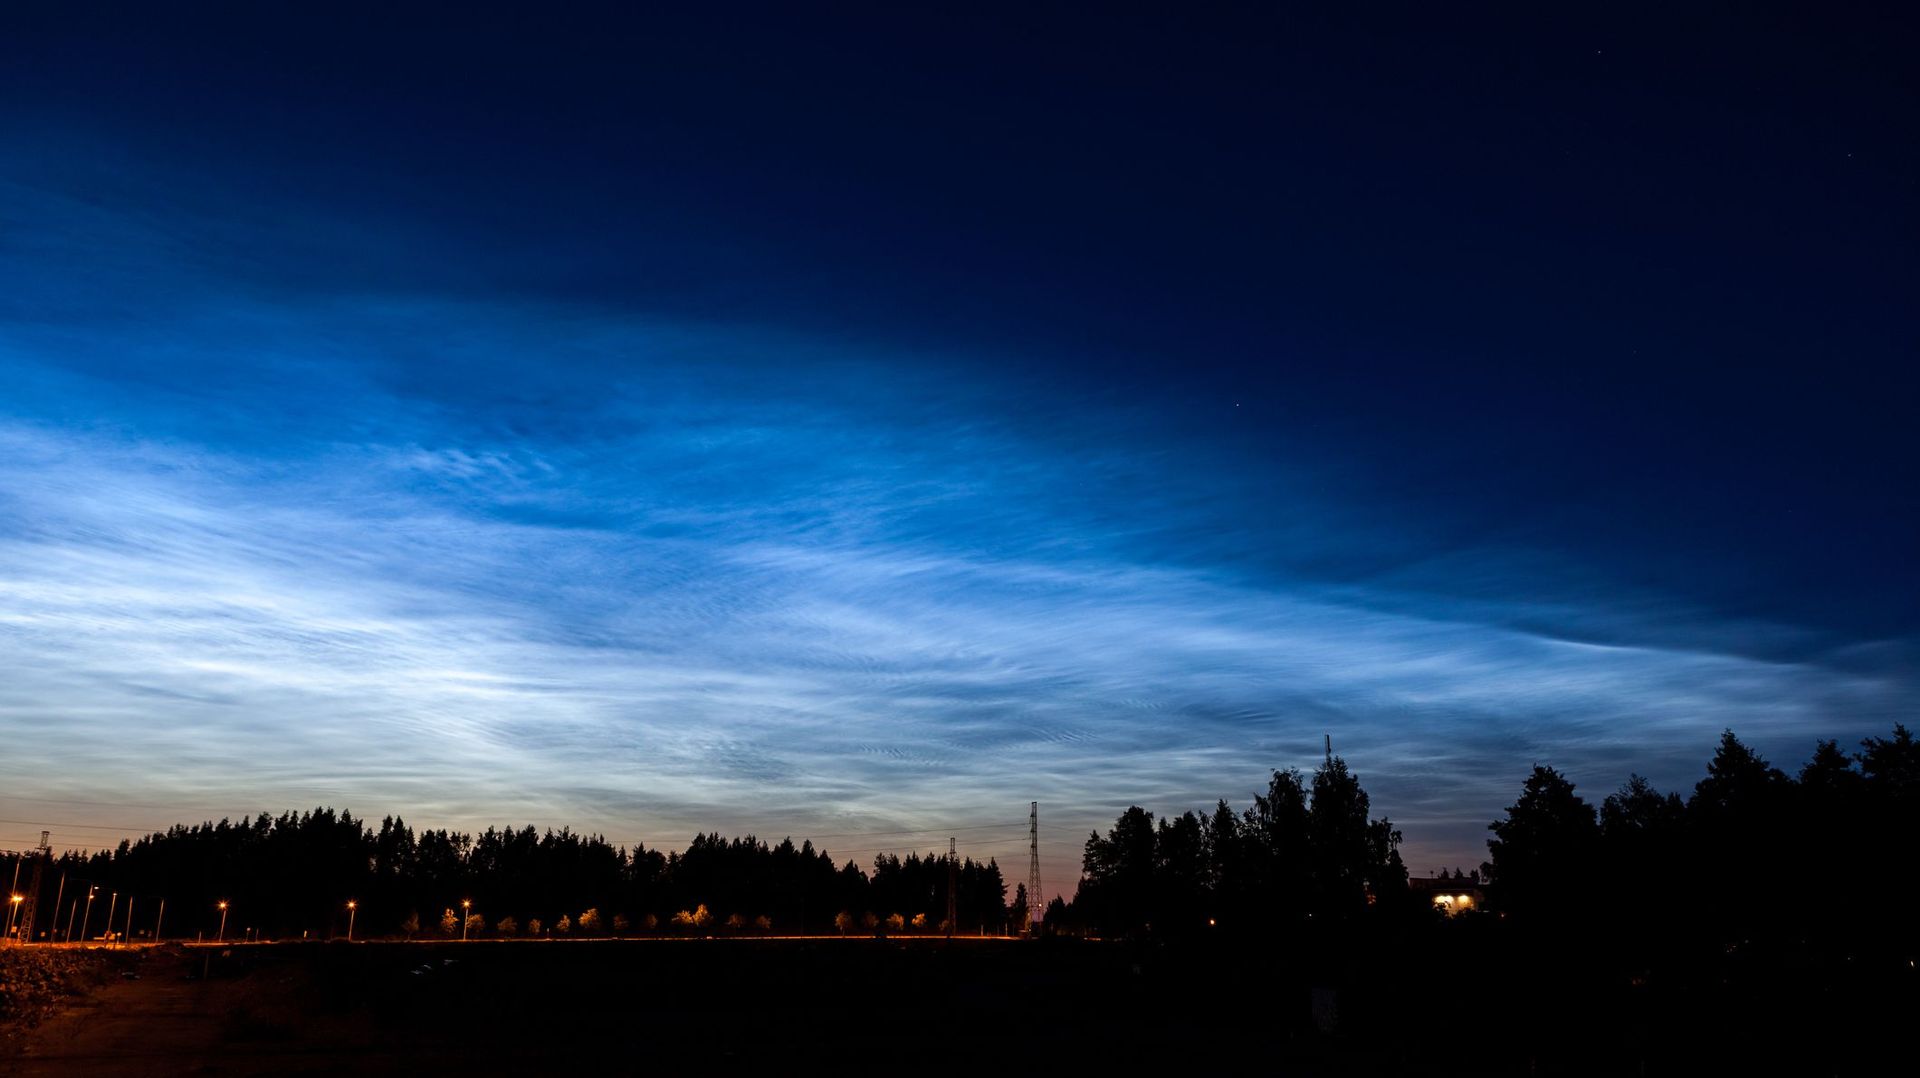 Noctilucent clouds glowing at night sky